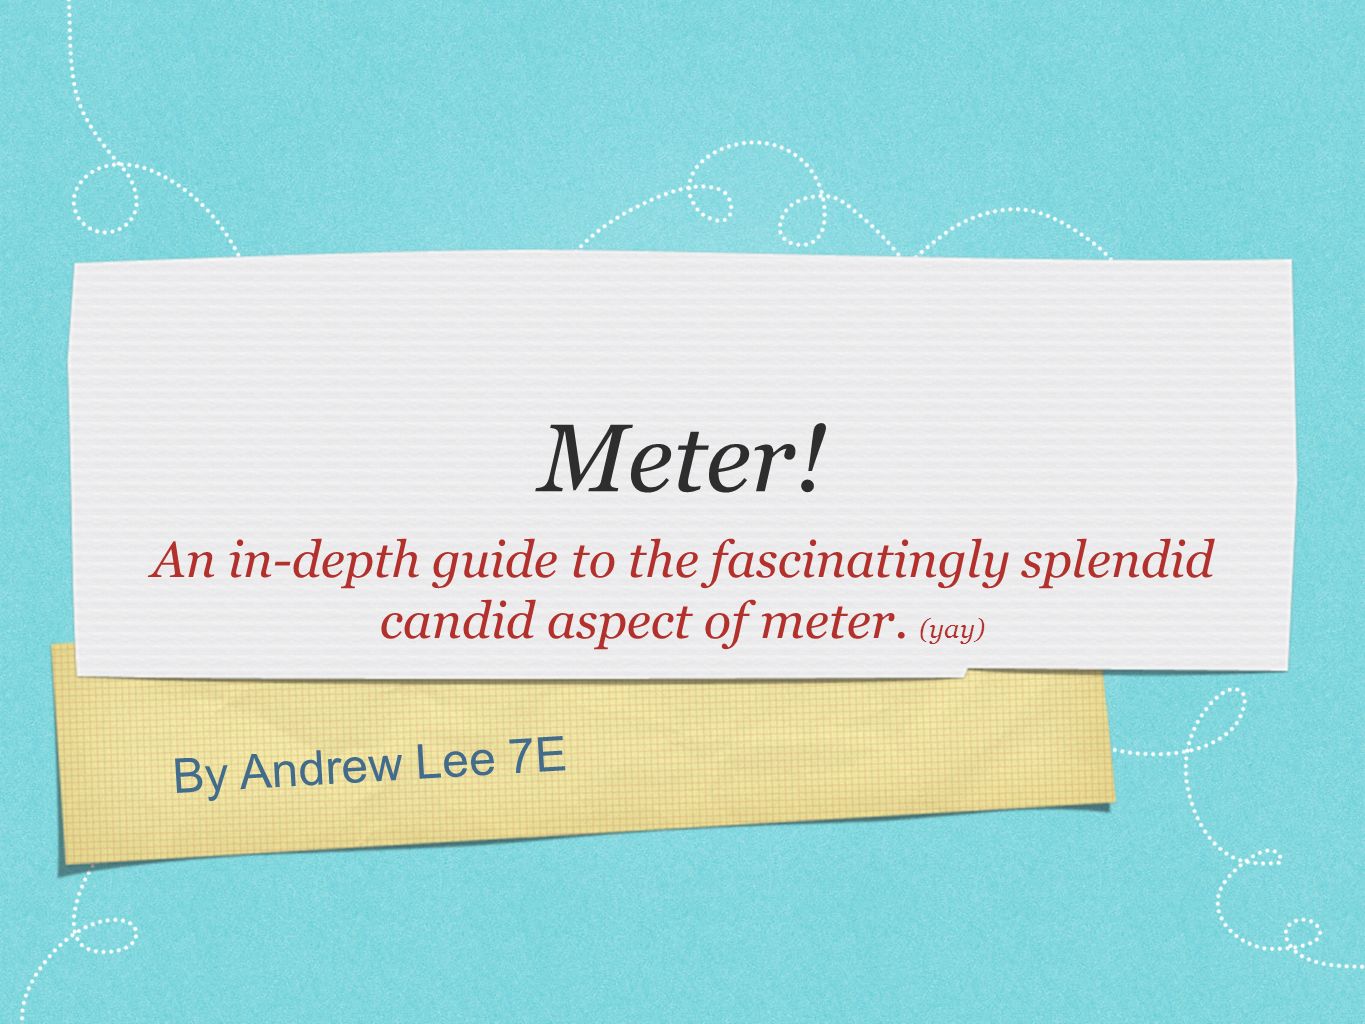 By Andrew Lee 7E Meter. An in-depth guide to the fascinatingly splendid candid aspect of meter.